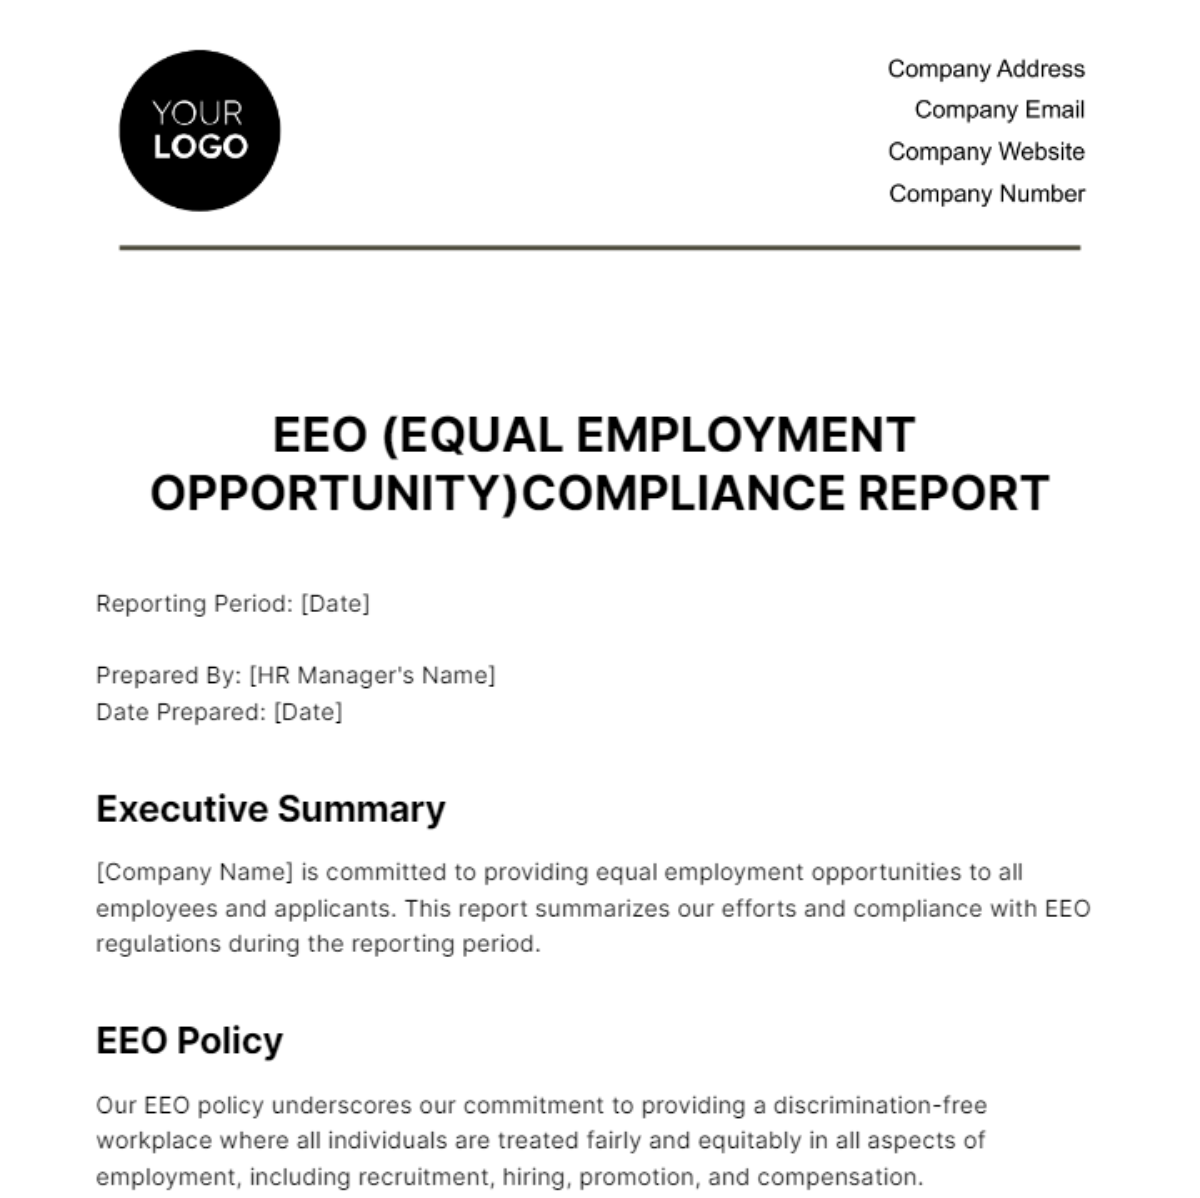 EEO (Equal Employment Opportunity) Compliance Report HR Template